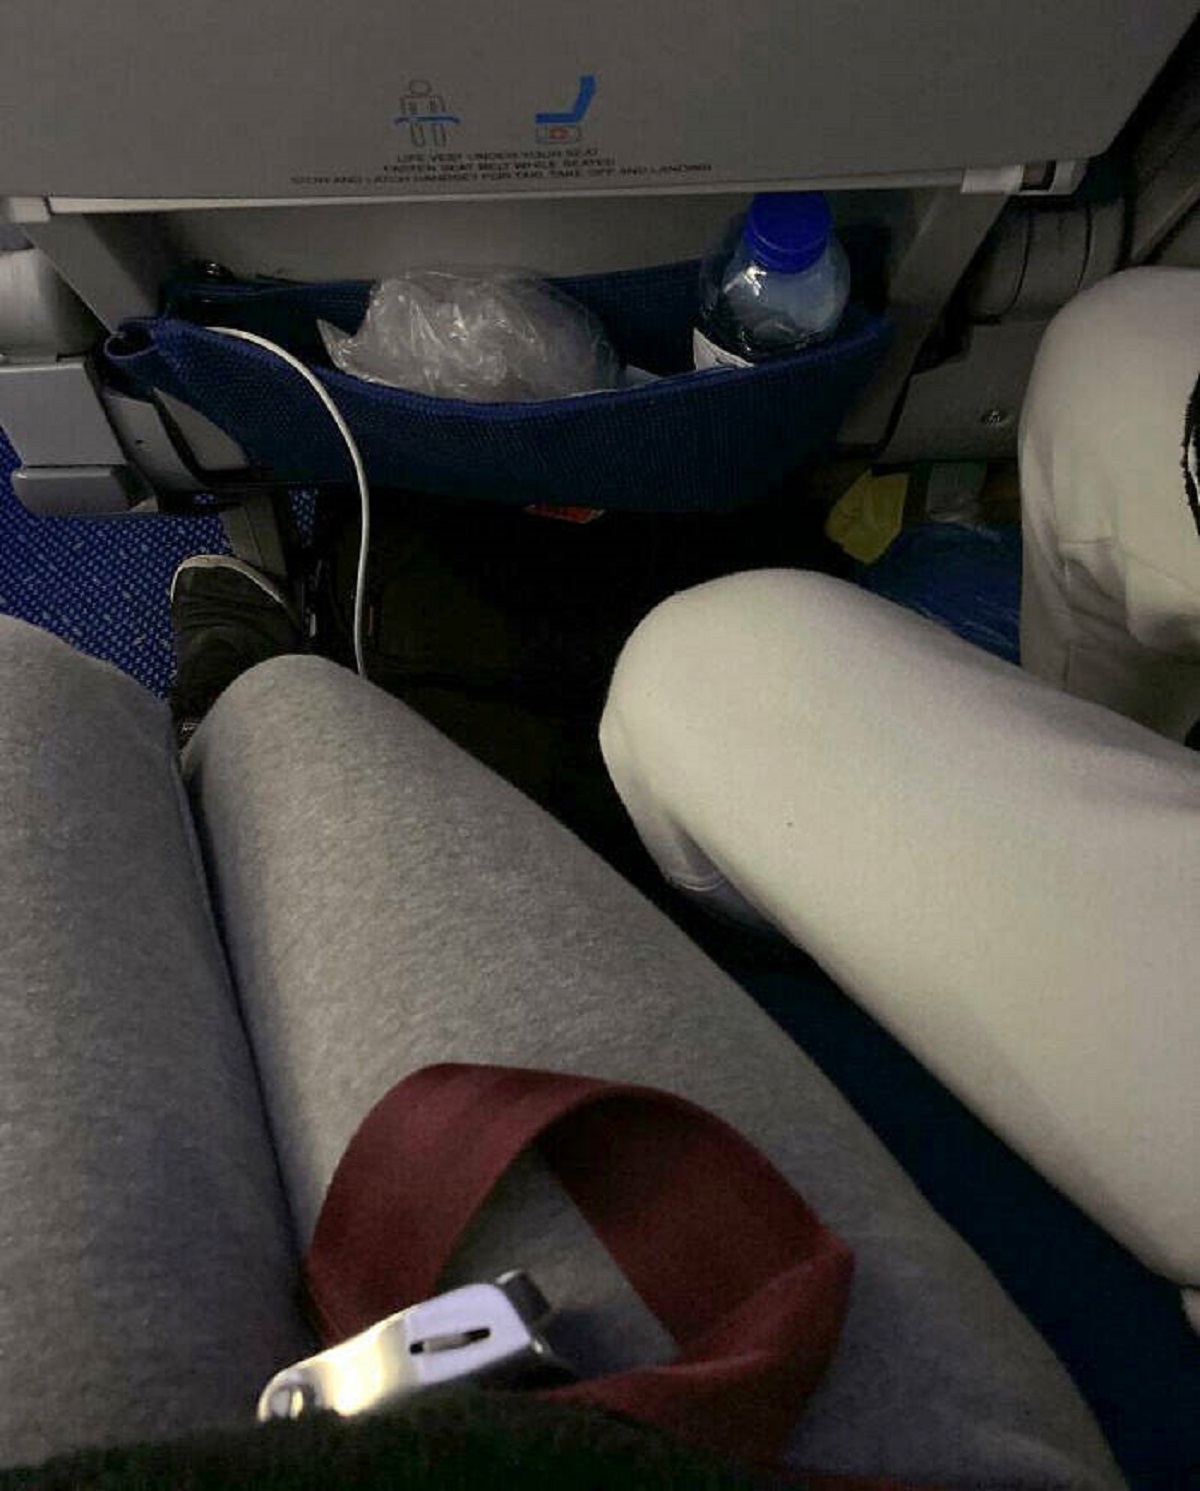 "What I Had To Deal With On An 11-Hour Flight Yesterday (I'm The Grey Sweatpants)"